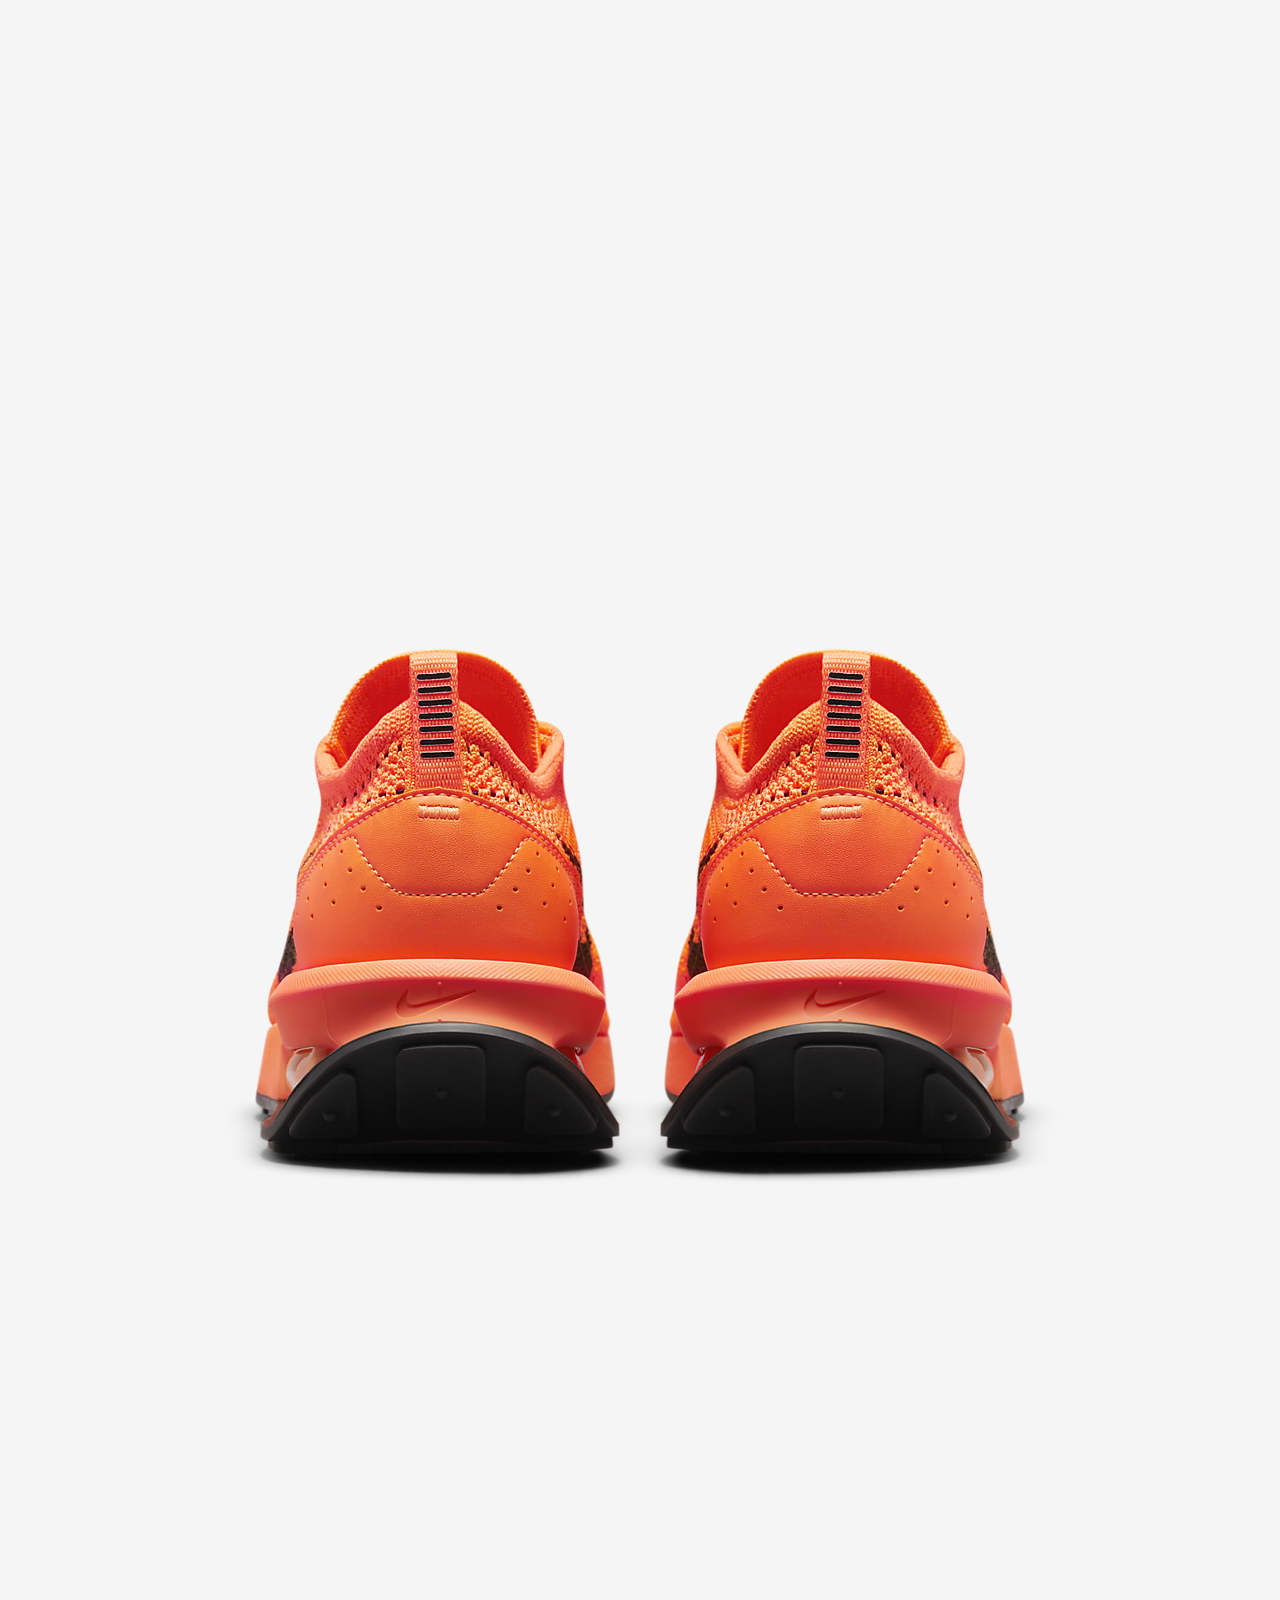 Sneakers & Casual shoes in Orange color for men | FASHIOLA INDIA